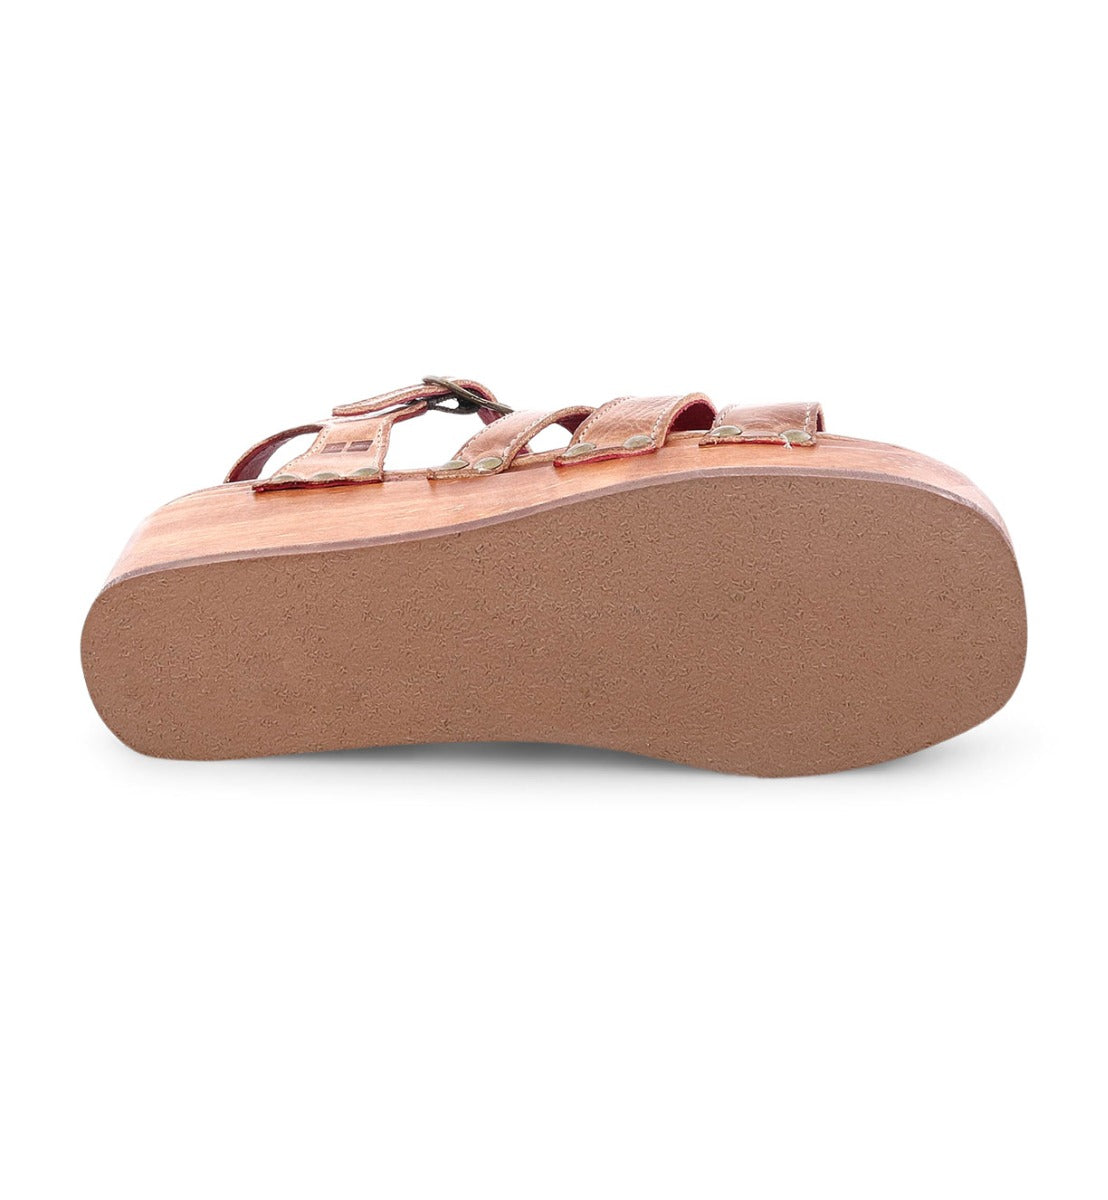 A women's Fabiola sandals with straps and buckles by Bed Stu.